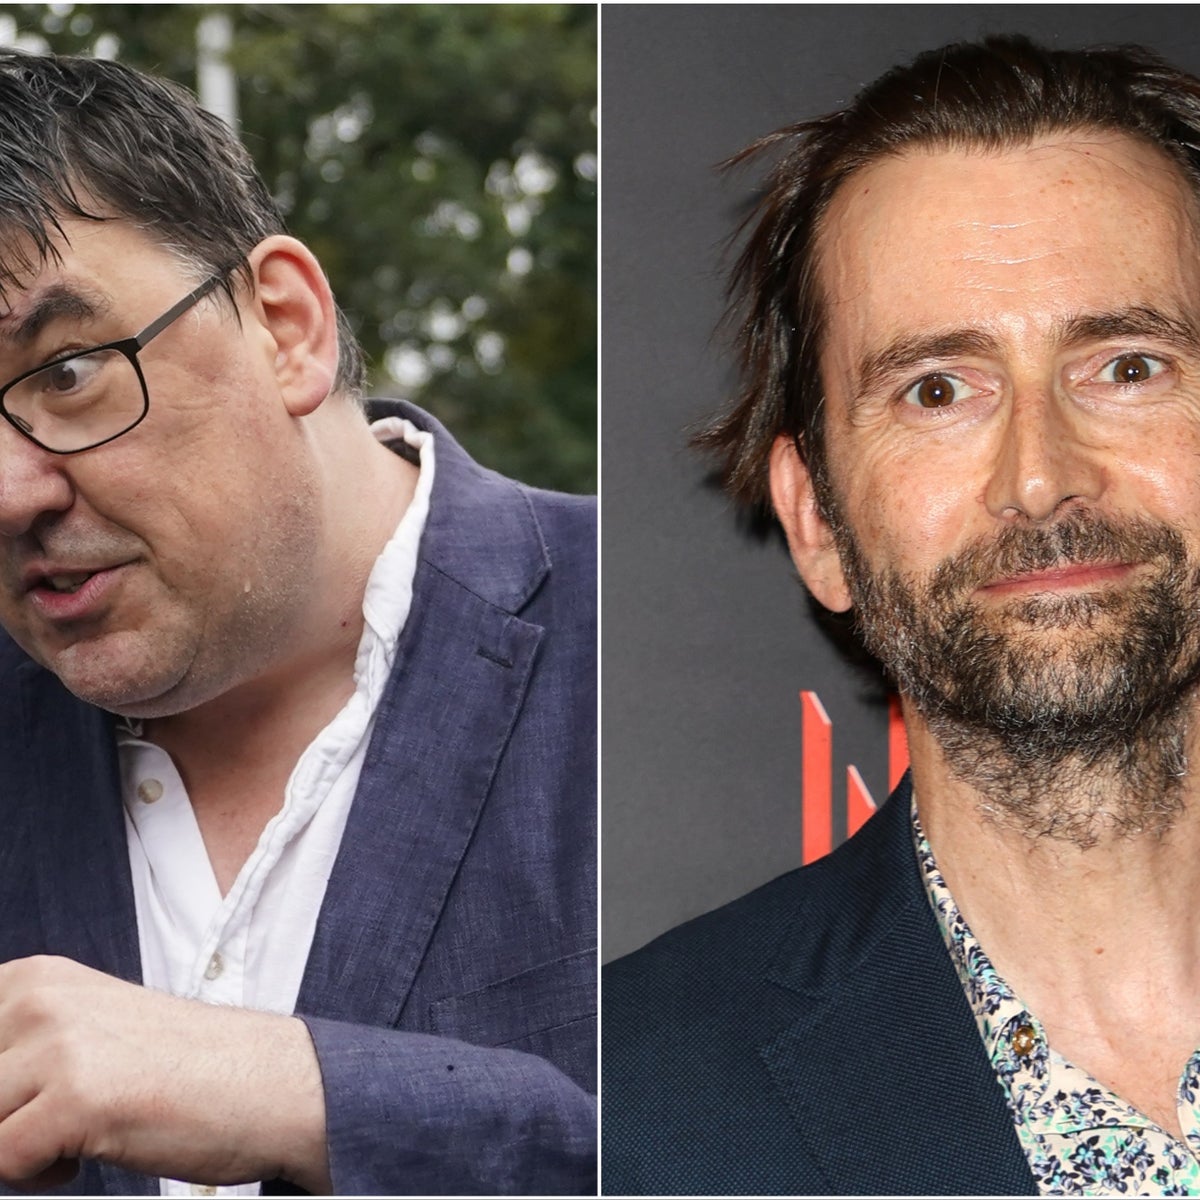 Graham Linehan ‘dropped by his agent’ after attacking Doctor Who star David Tennant over Tennant’s support for transgender rights (independent.co.uk)